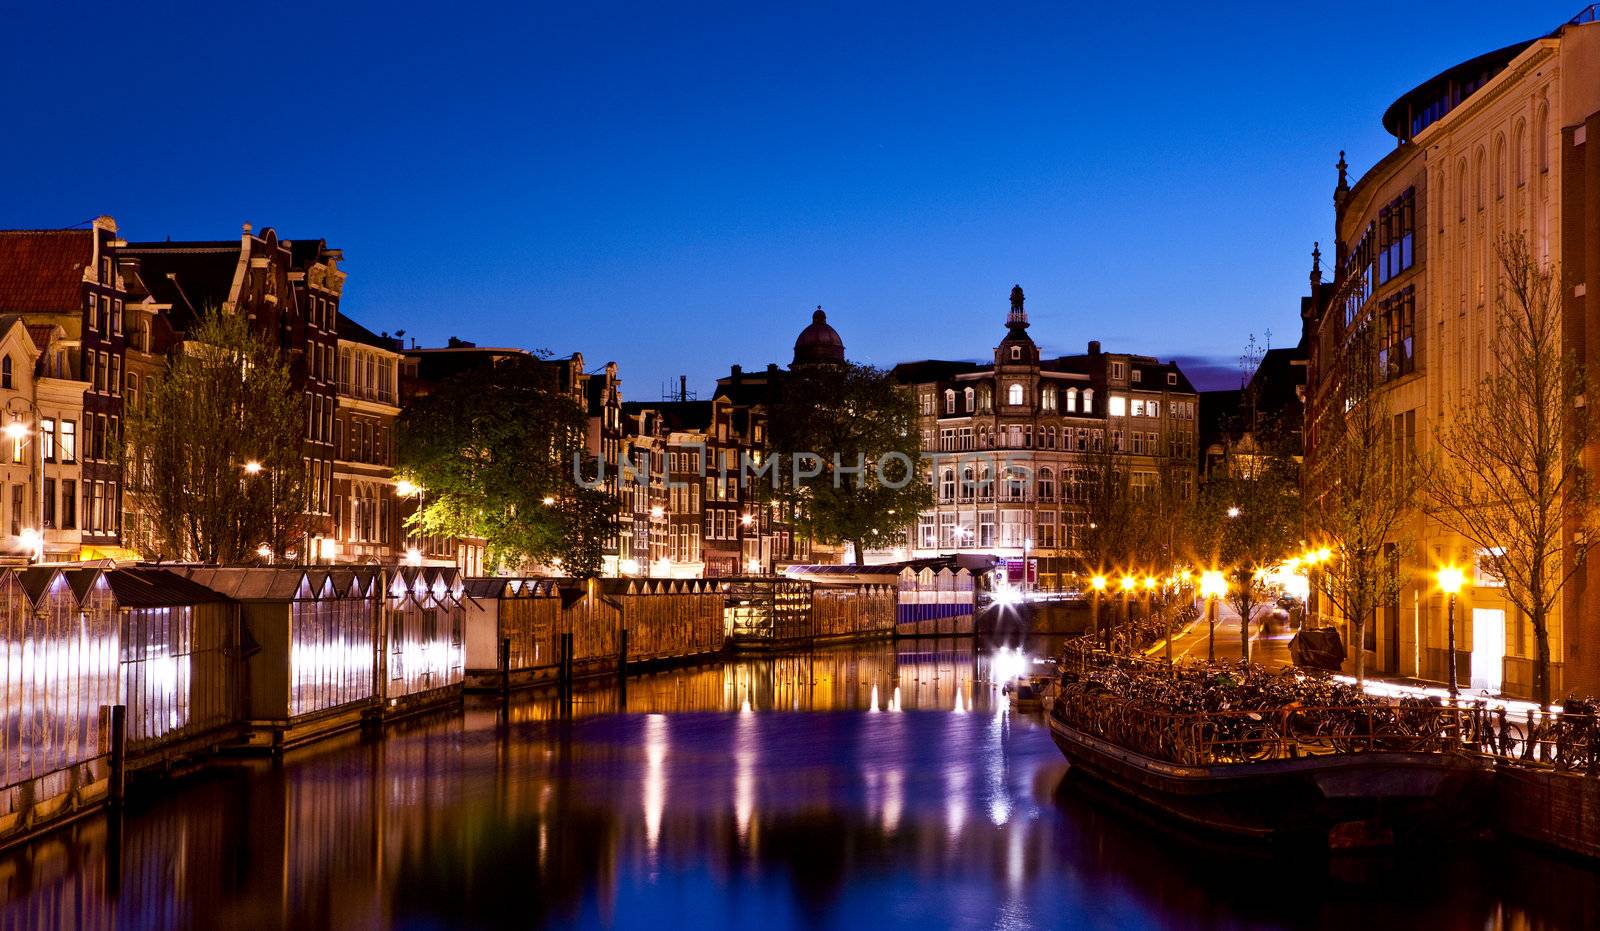 Beautiful night view of the channel in Amsterdam